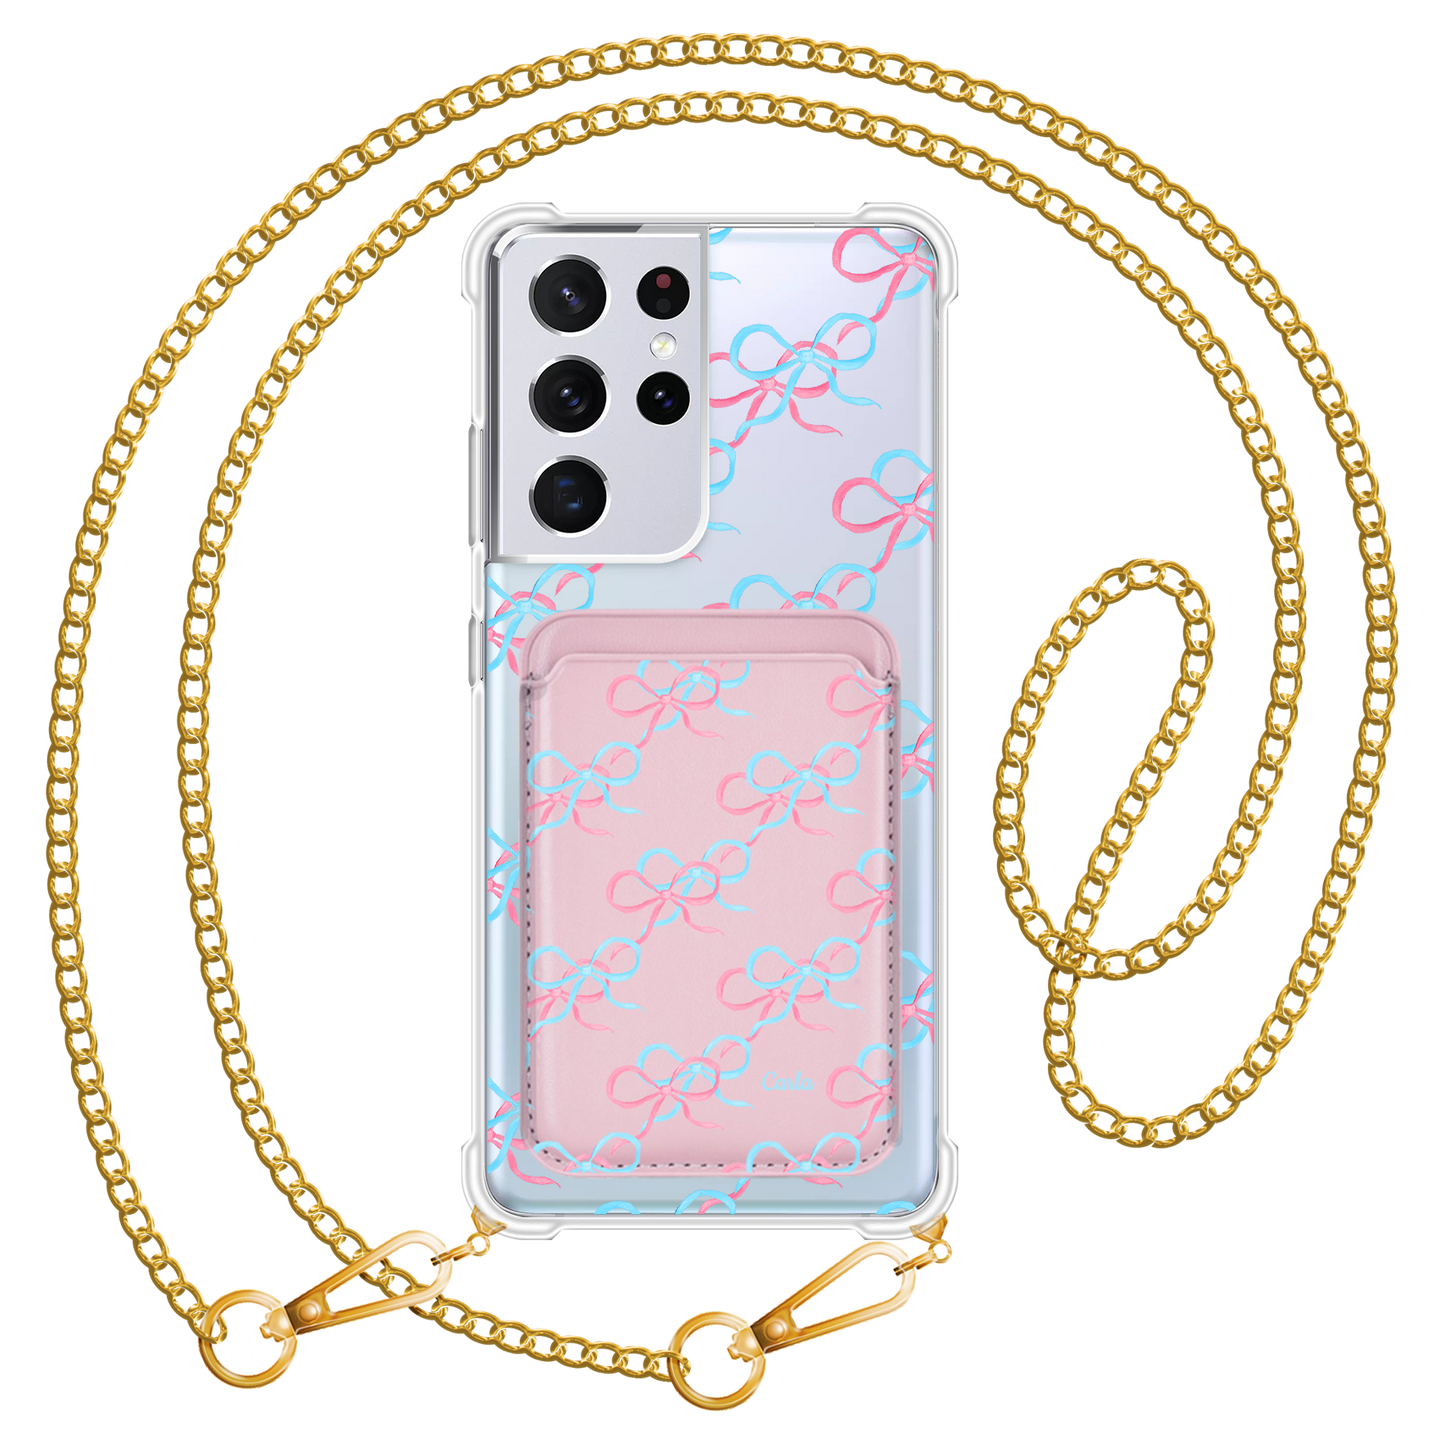 Android Magnetic Wallet Case - Coquette Pink & Blue Bow